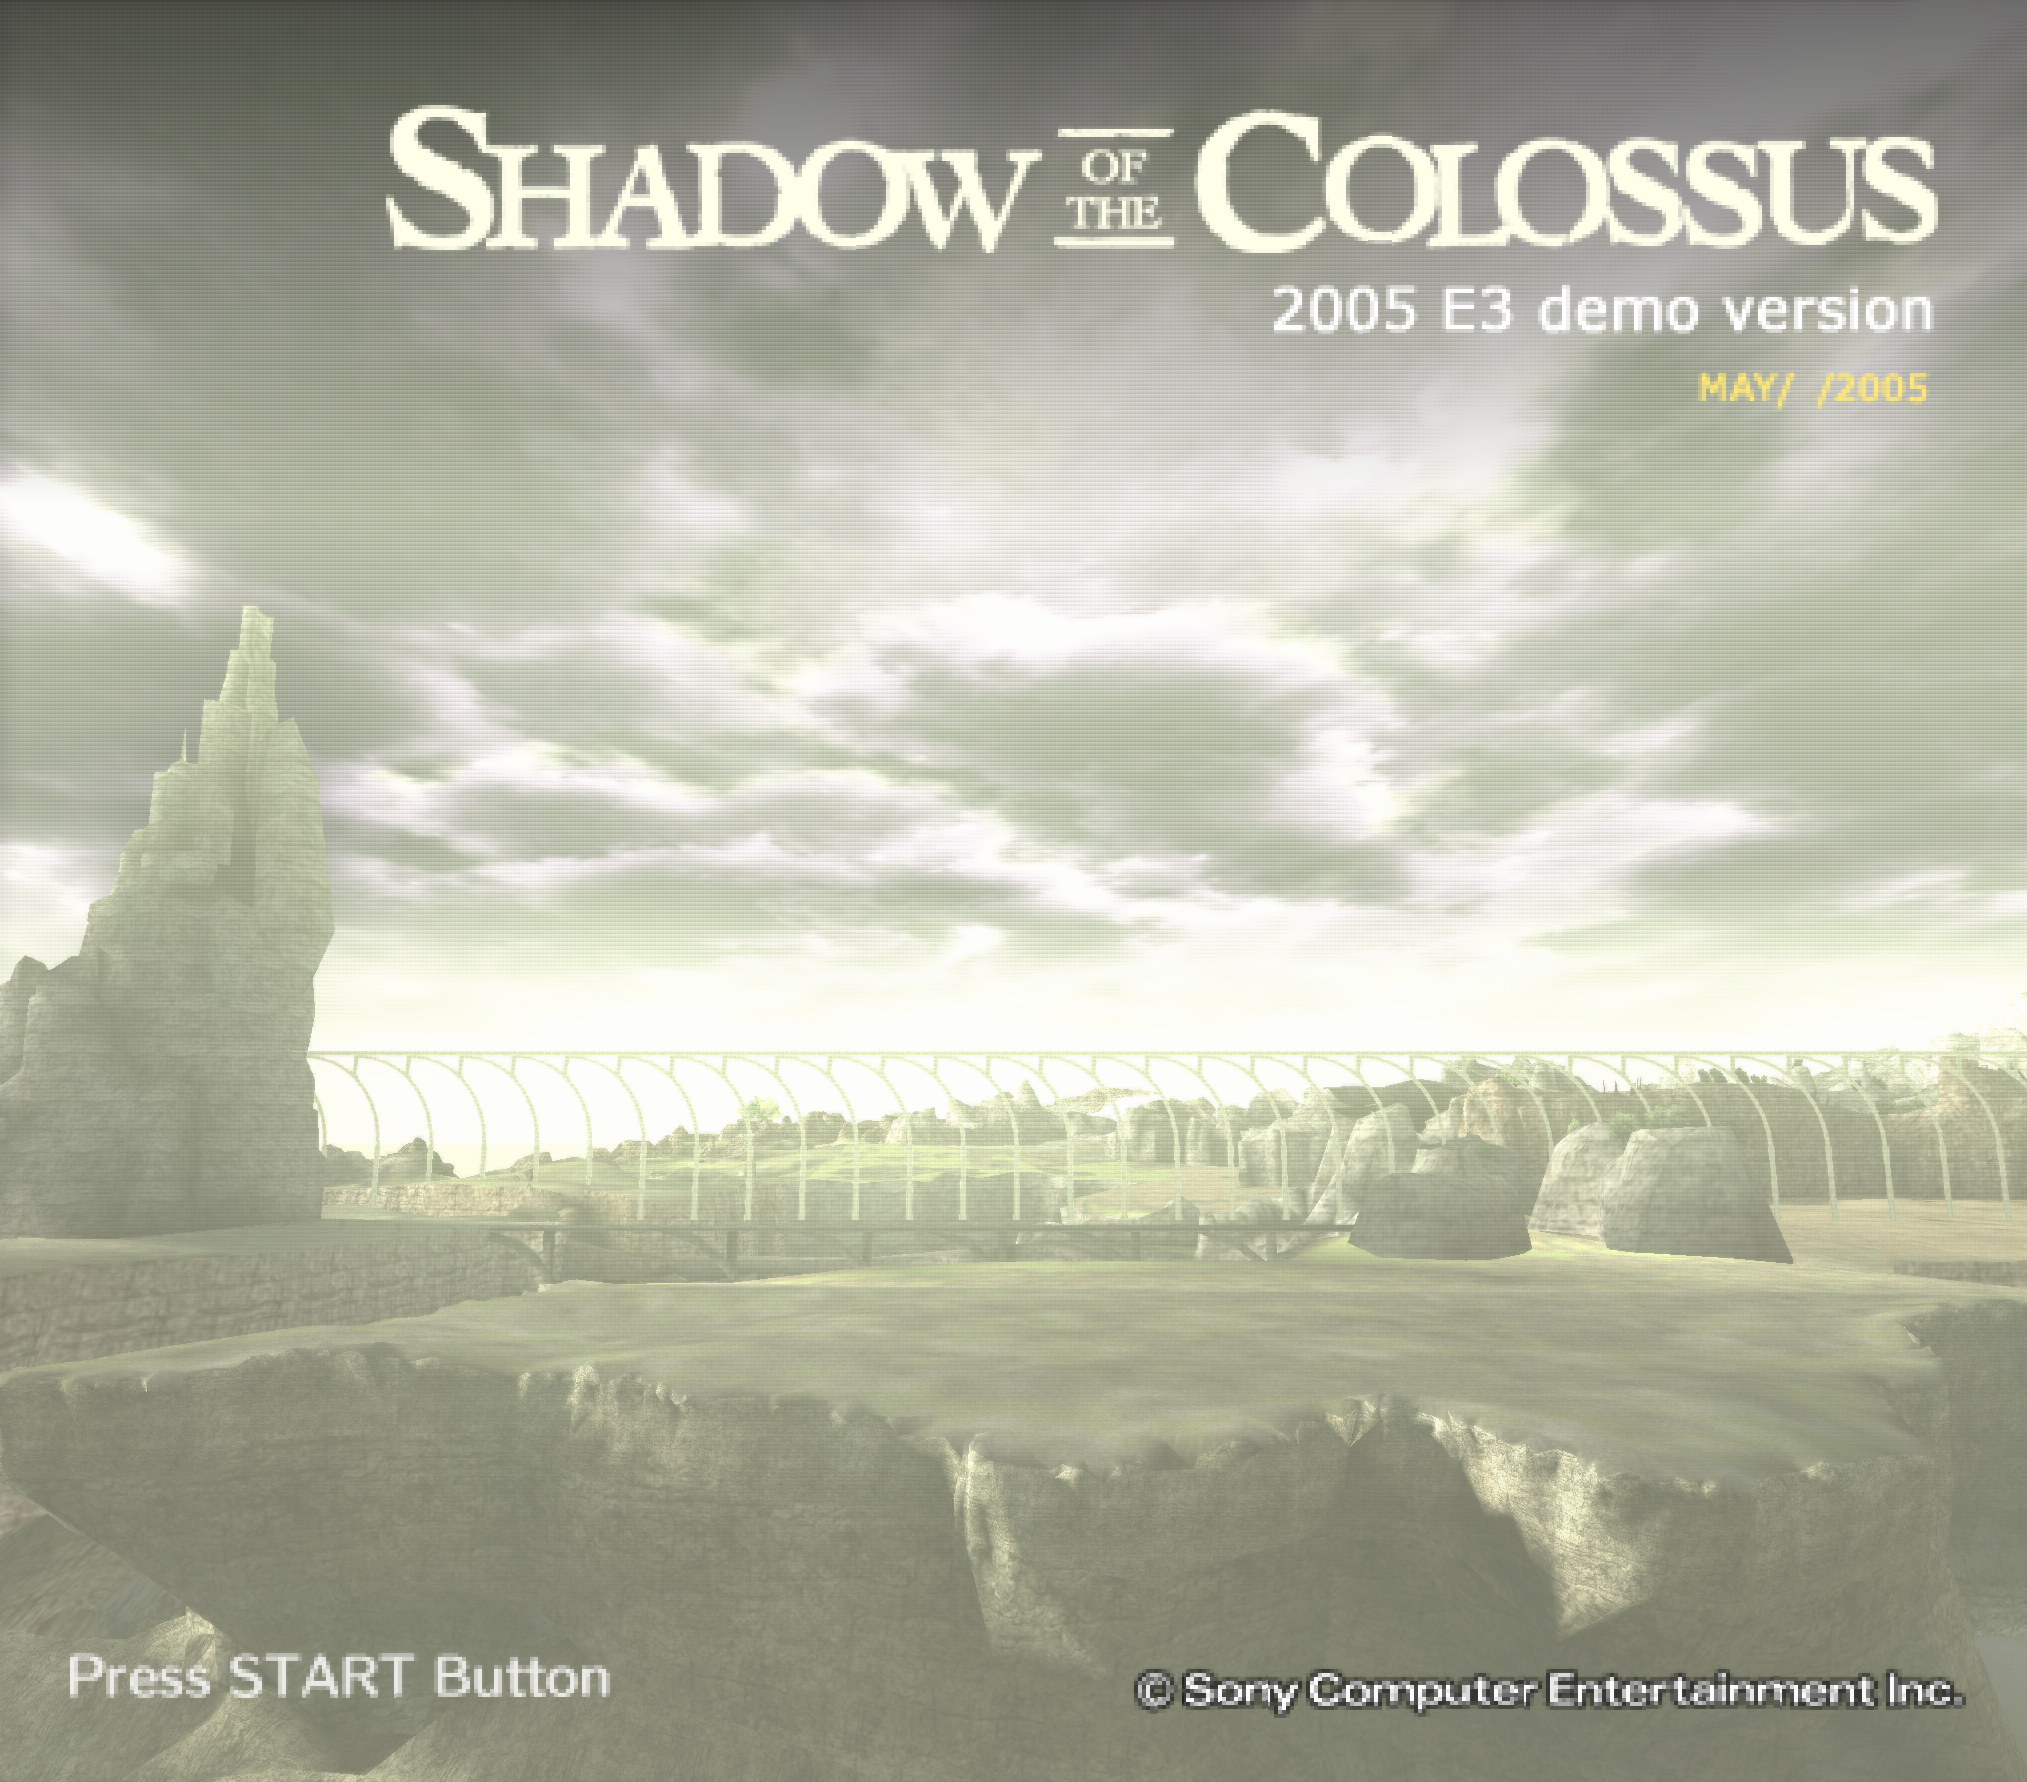 PlayStation on X: Ready for another Shadow of the Colossus